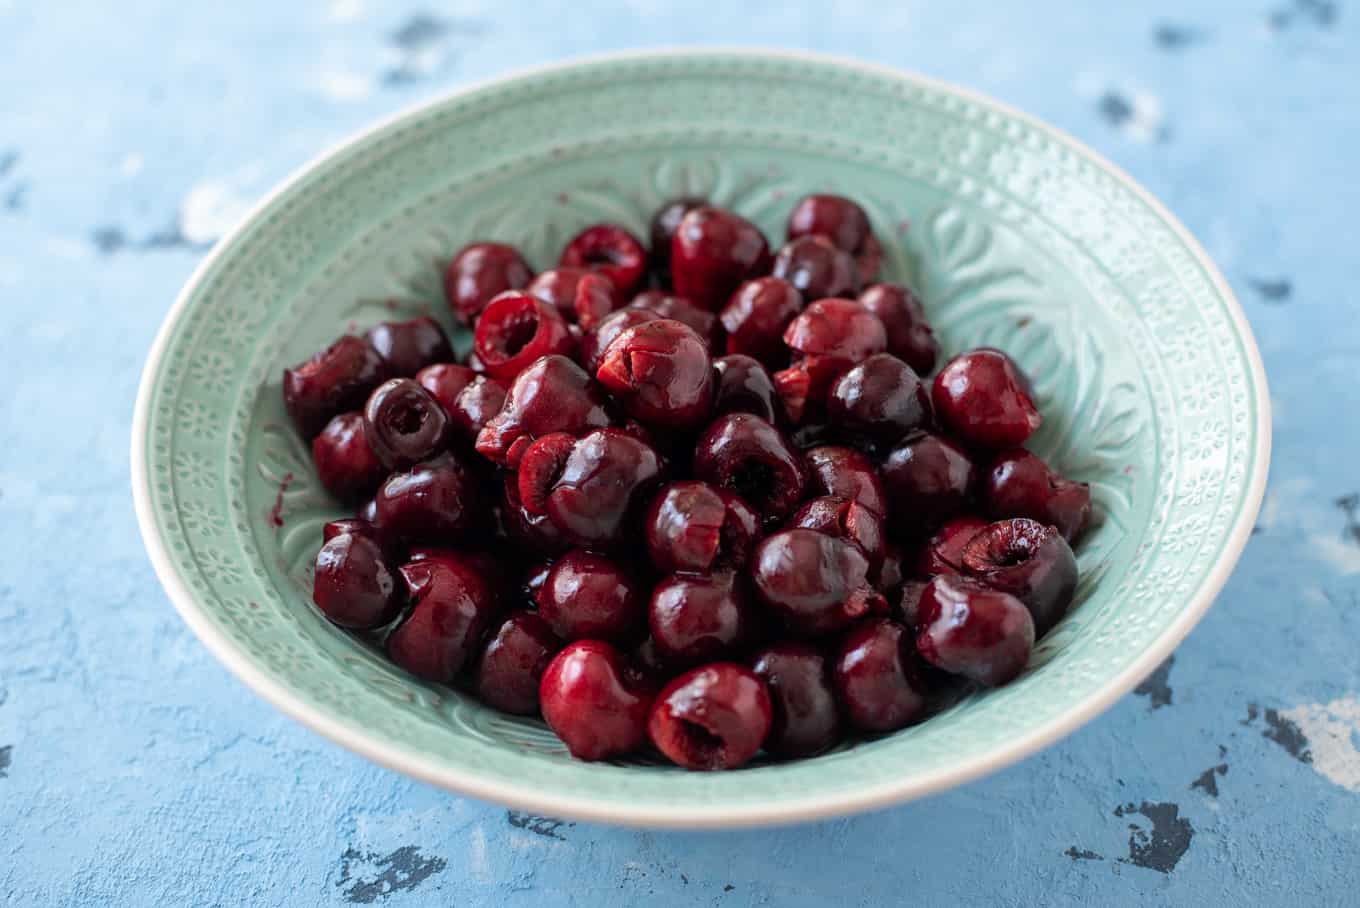 A bowl of pitted cherries on a table.